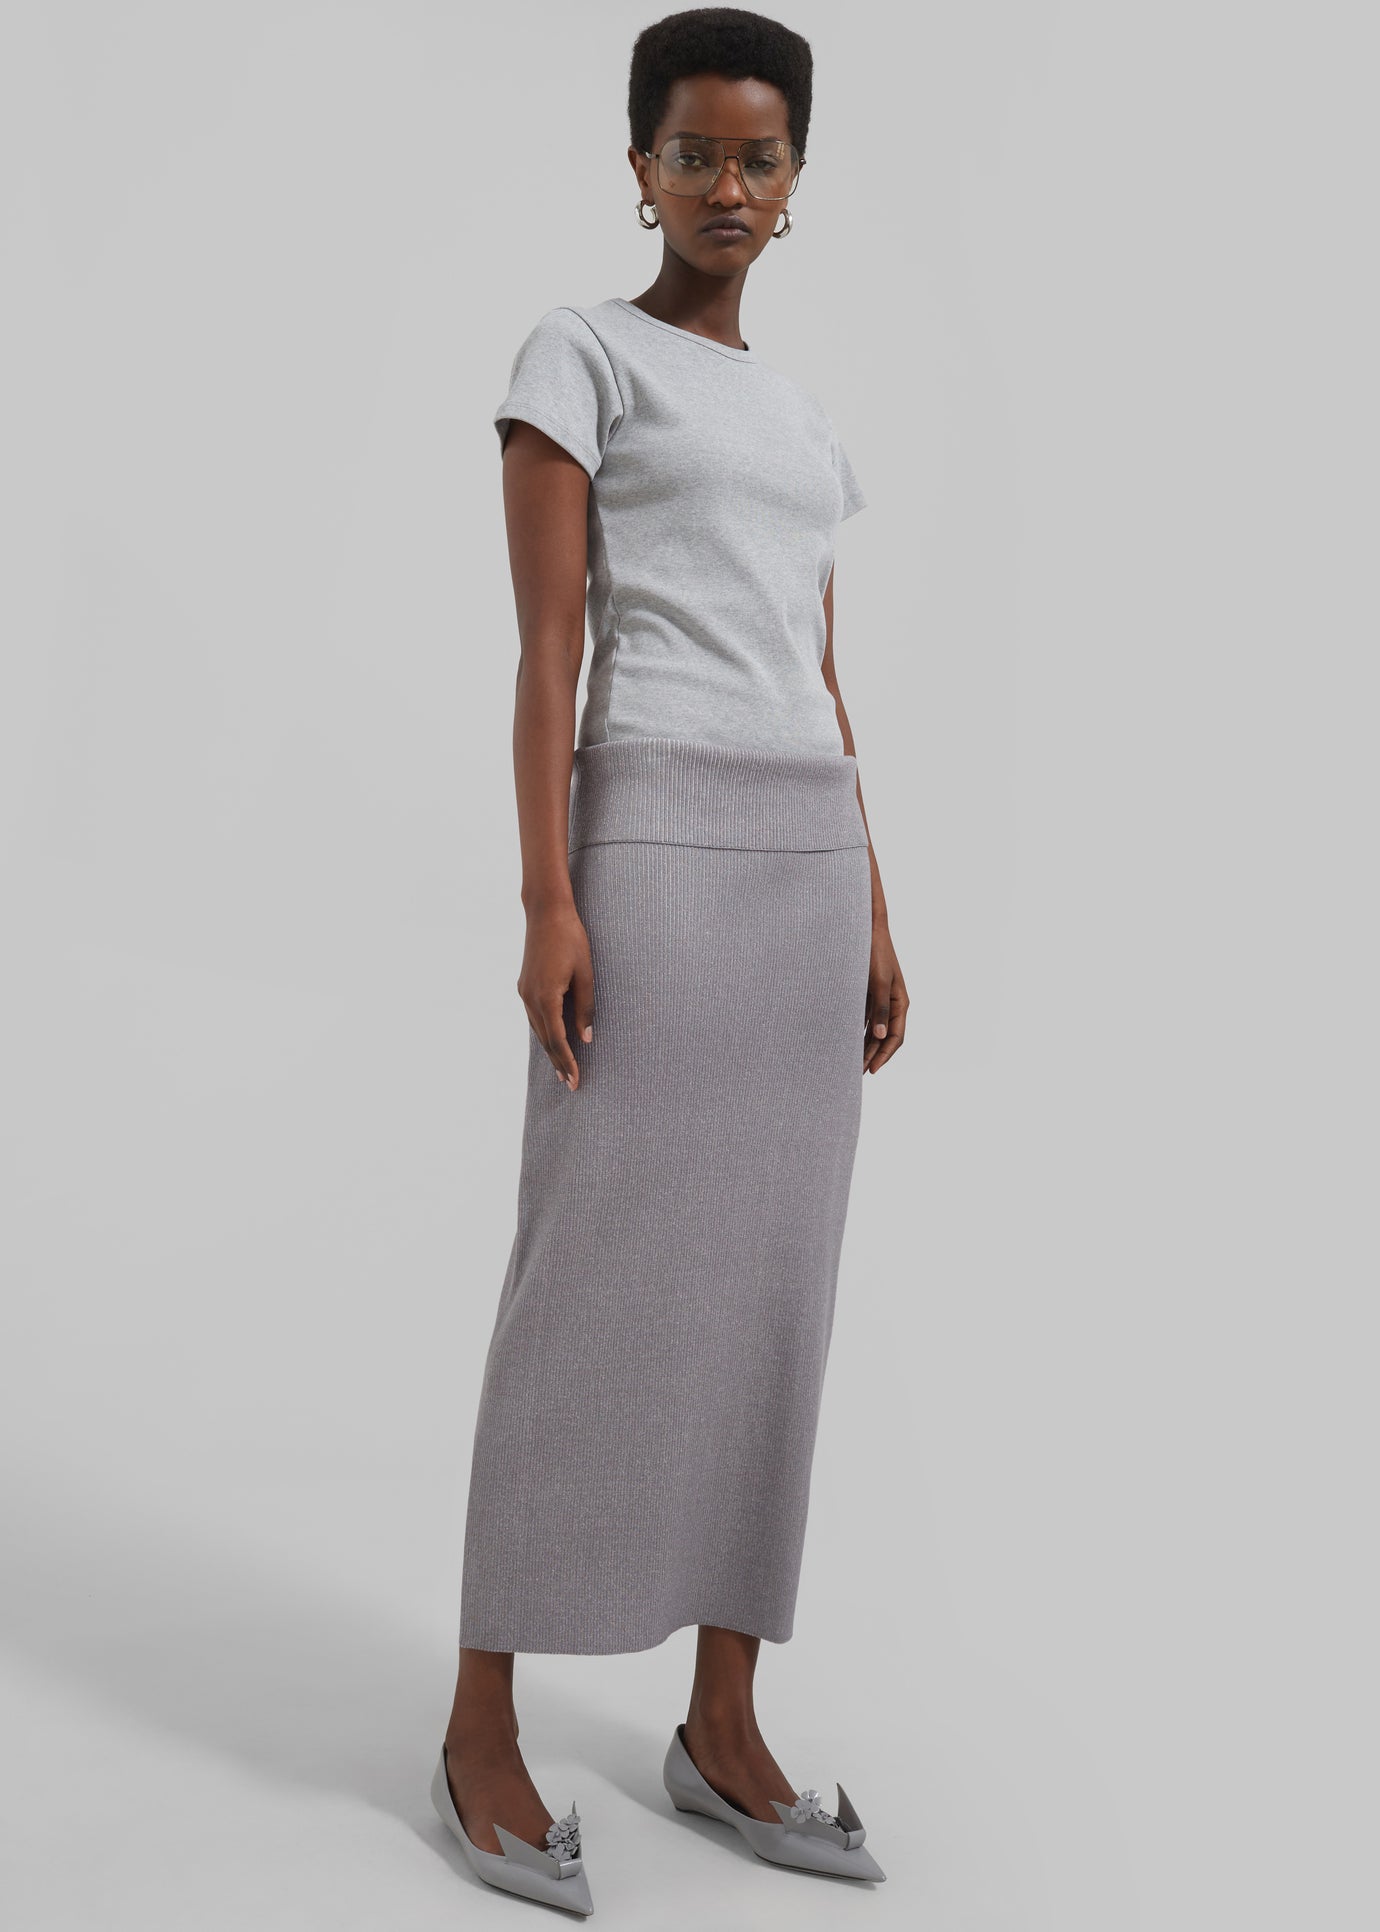 Proenza Schouler White Label Willow Skirt In Plaited Rib Knits - Fog/Off White - 1